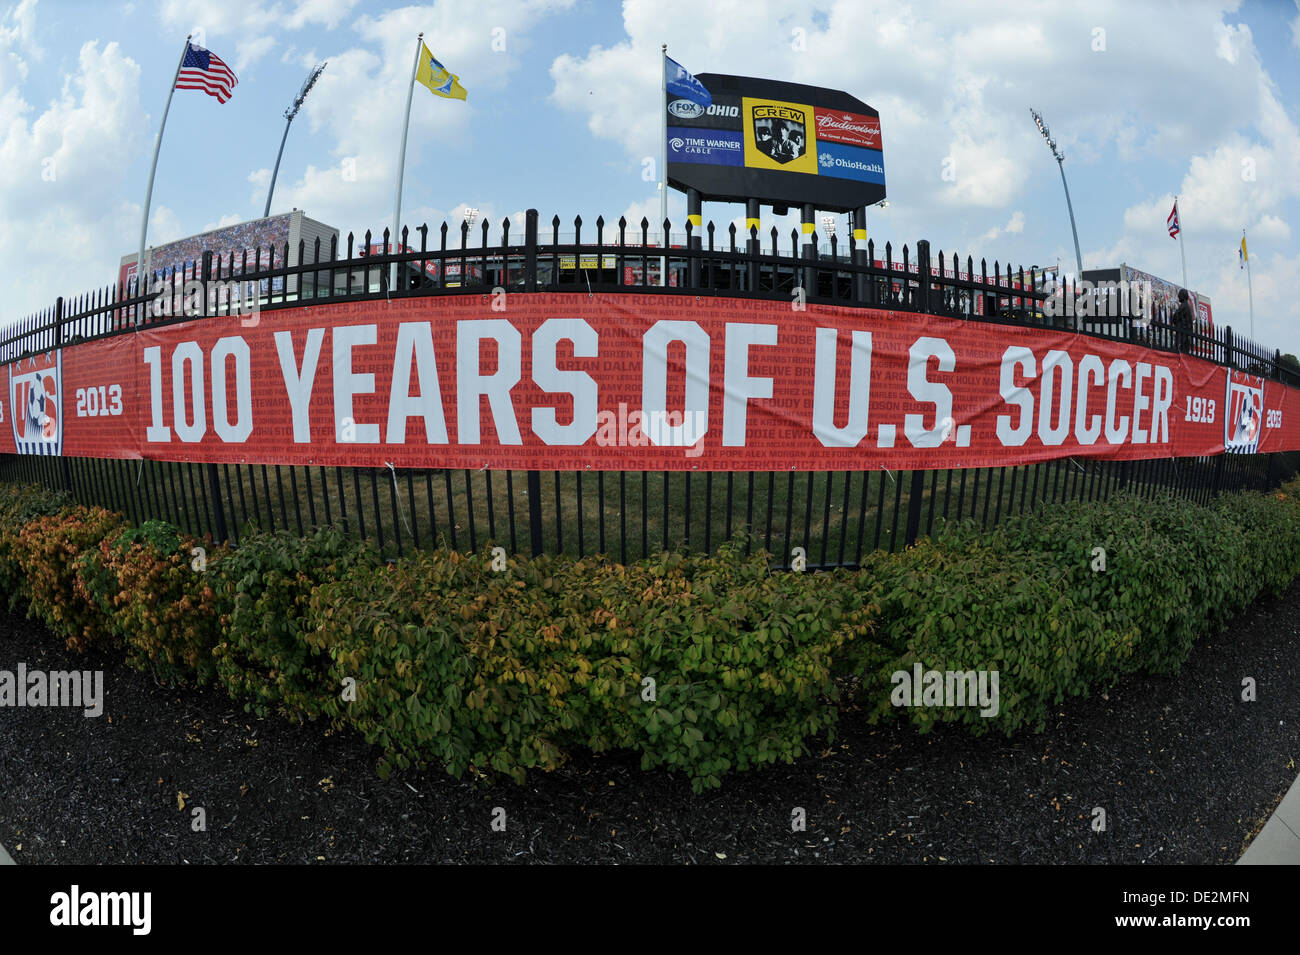 Columbus, Ohio, USA. 10th Sep, 2013. September 10, 2013: 100 hundred years of soccer banner is hung outside Columbus Crew Stadium during the U.S. Men's National Team vs. Mexico National Team- World Cup Qualifier match at Columbus Crew Stadium - Columbus, OH. Credit:  csm/Alamy Live News Stock Photo